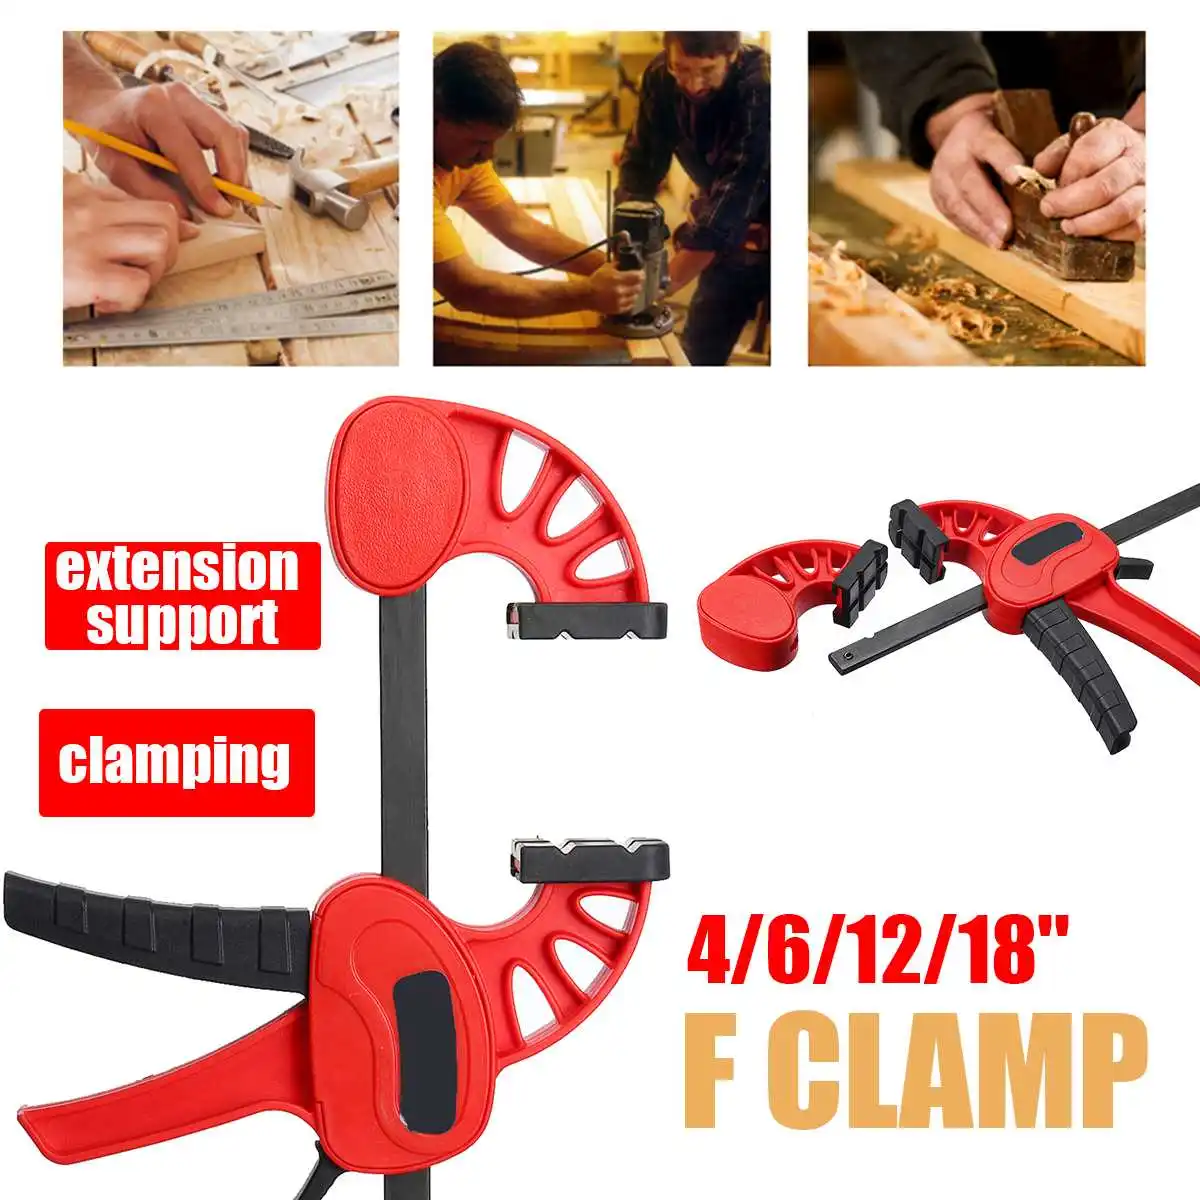 

2019 New 4/6/12/18 Inch F Clamp Heavy Duty Holder Quick Release Parallel Wood Working Clamps Carpenter Tool DIY Hand Woodworking